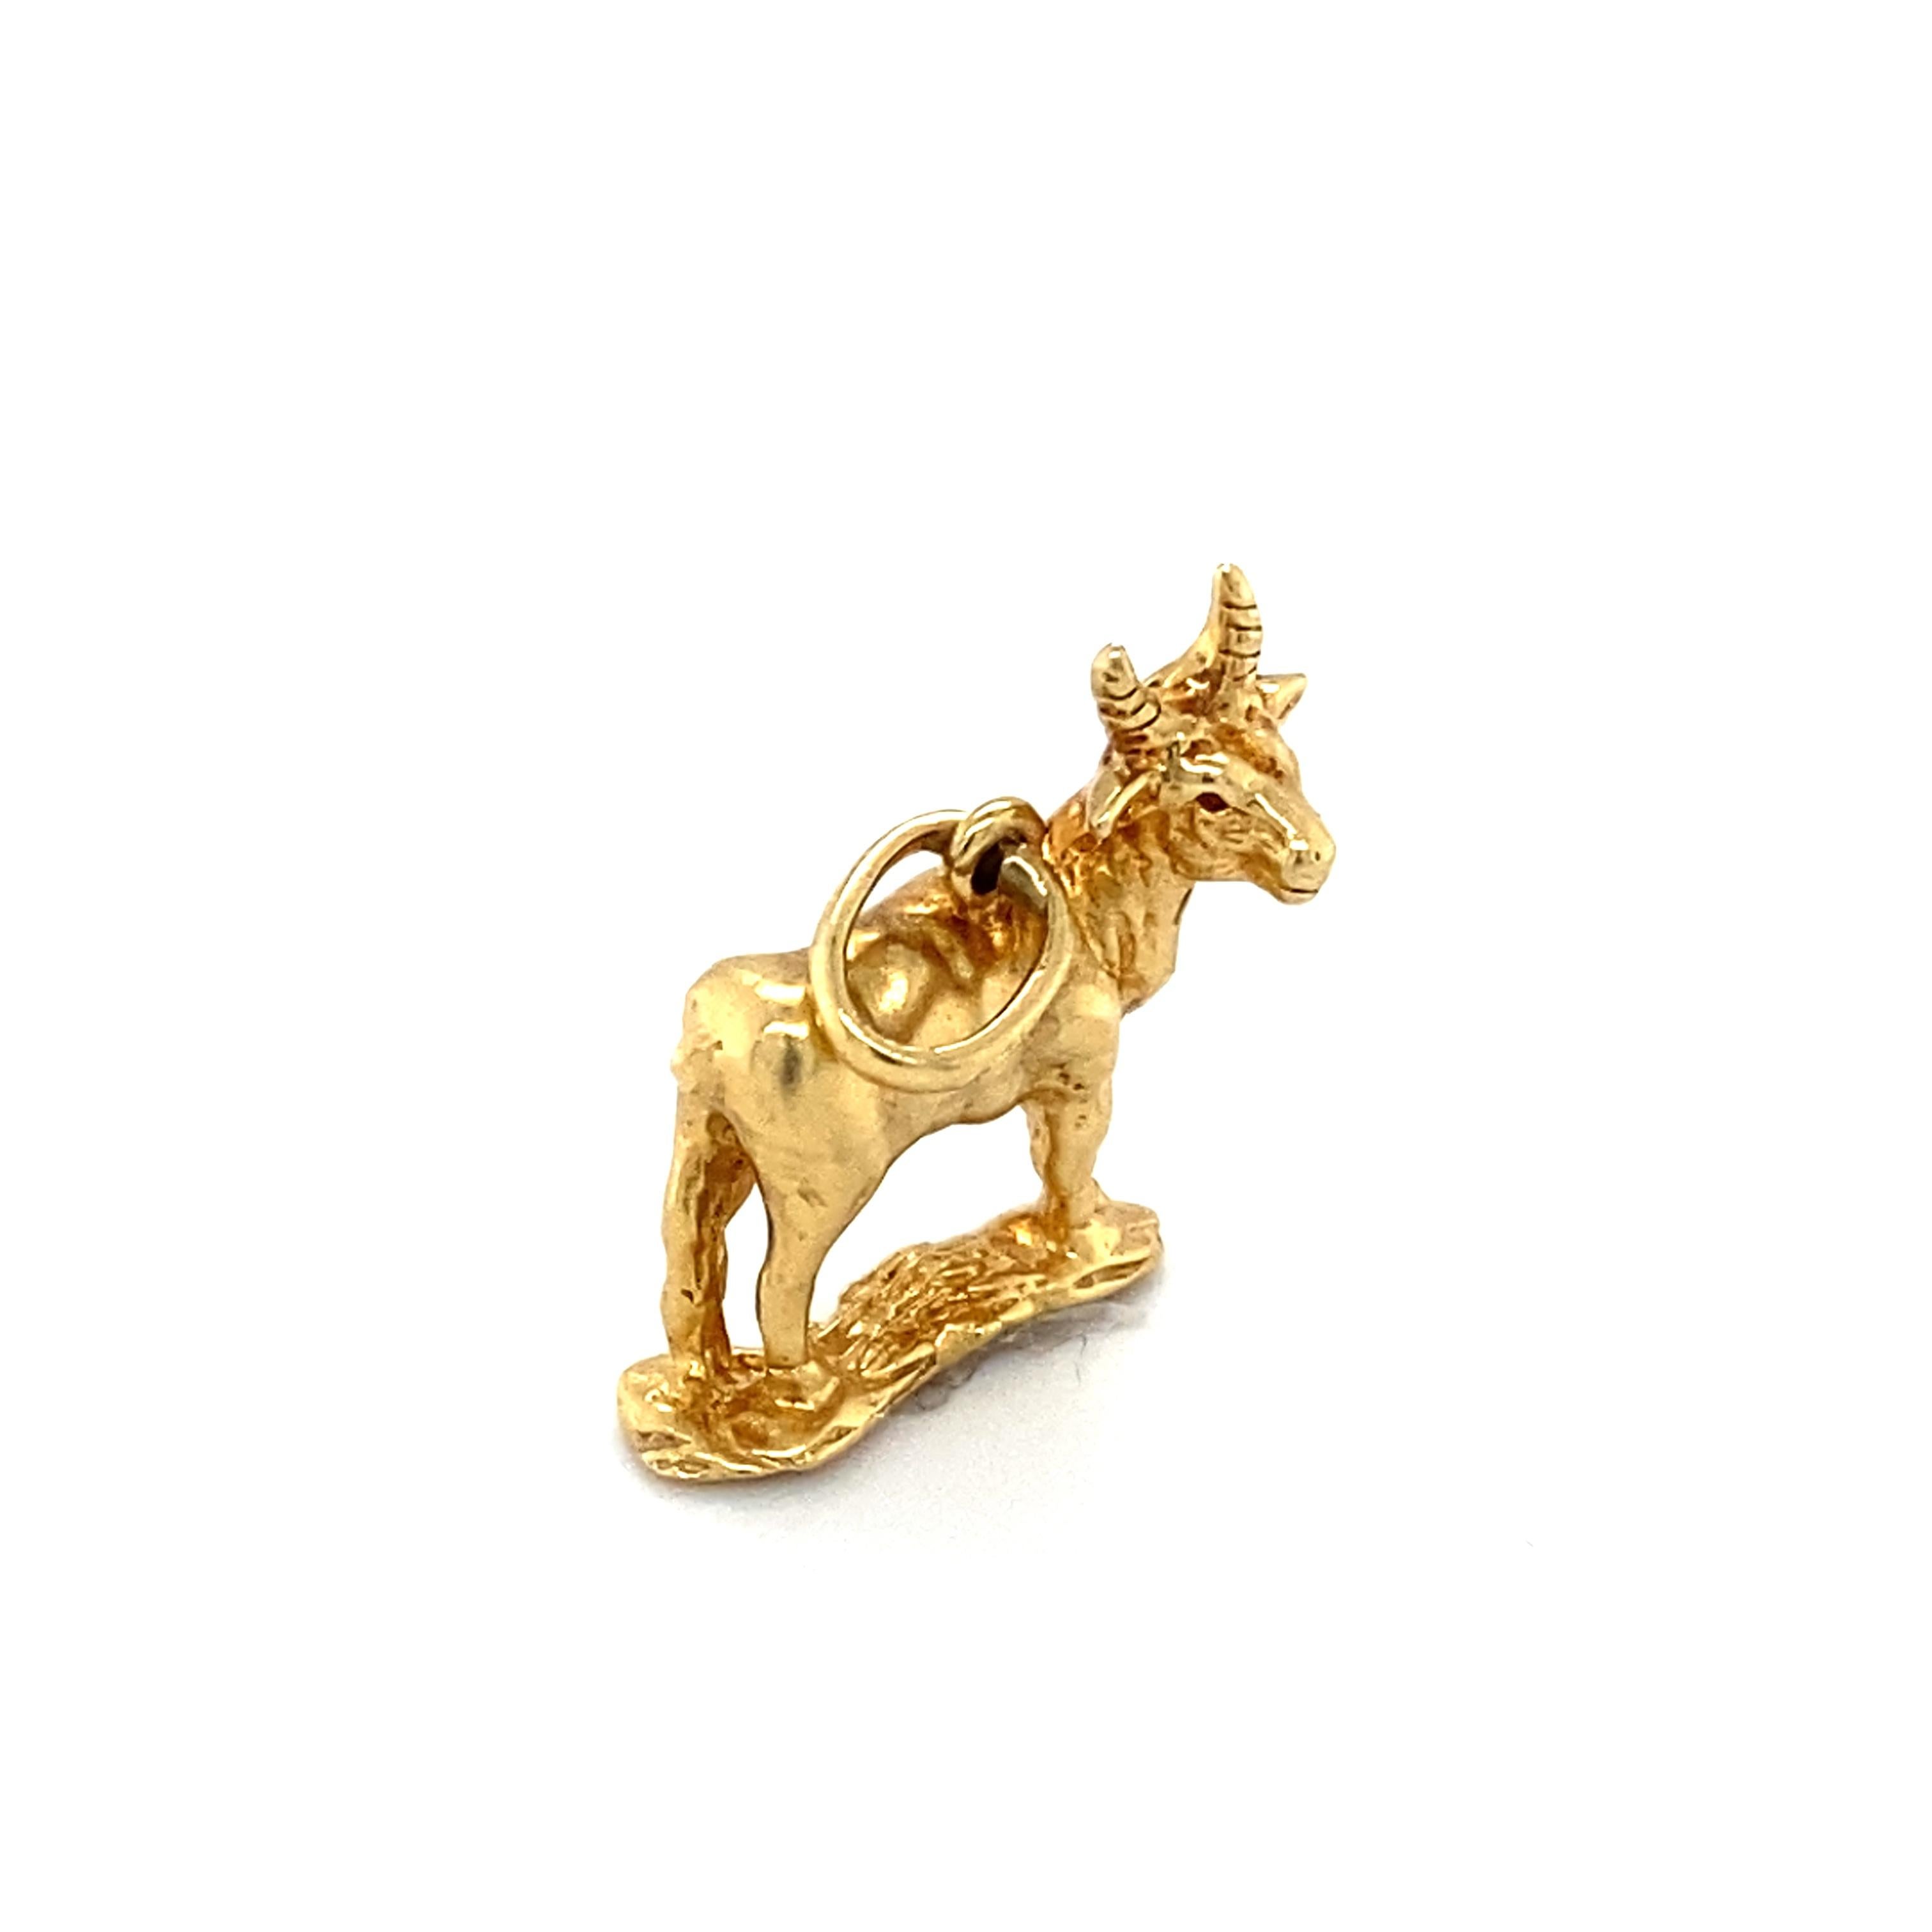 Item Details: 
Metal: 18 Karat Yellow Gold 
Weight: 4.2 grams 
Measurements: .75 inches long x .5 inches wide 

Item Features: 
This stunning 1950s retro goat charm is set in 14 karat gold. Capricorns, the goat symbol, are a sign of great health and